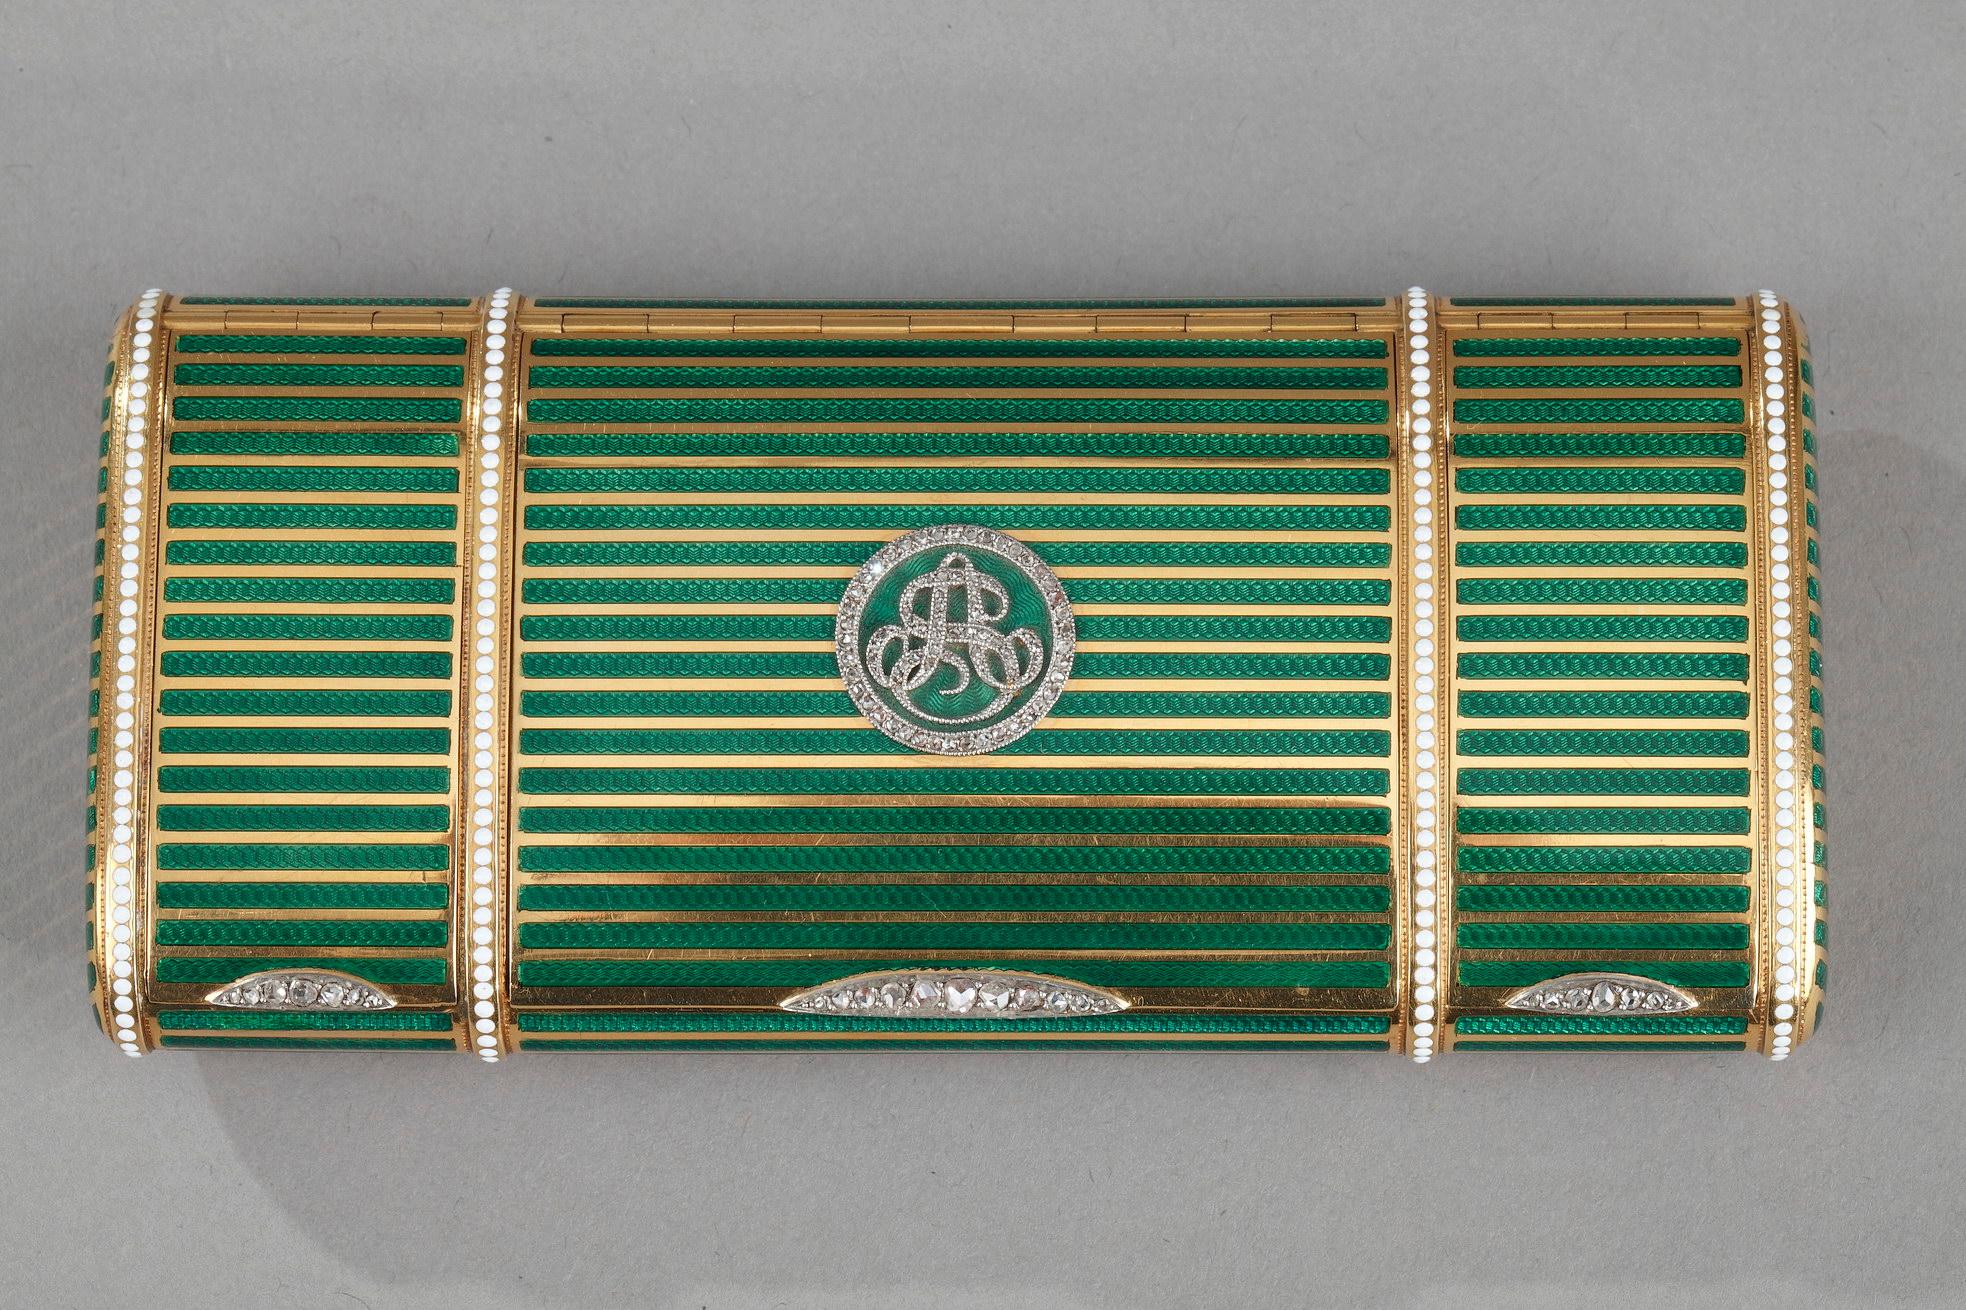 A rectangular vanity case or box, with bi-color gold and green translucent enamel. The decoration presents an alternation of gold bands and enamel bands of translucent green color revealing a guilloché. The box reveals three compartments probably to